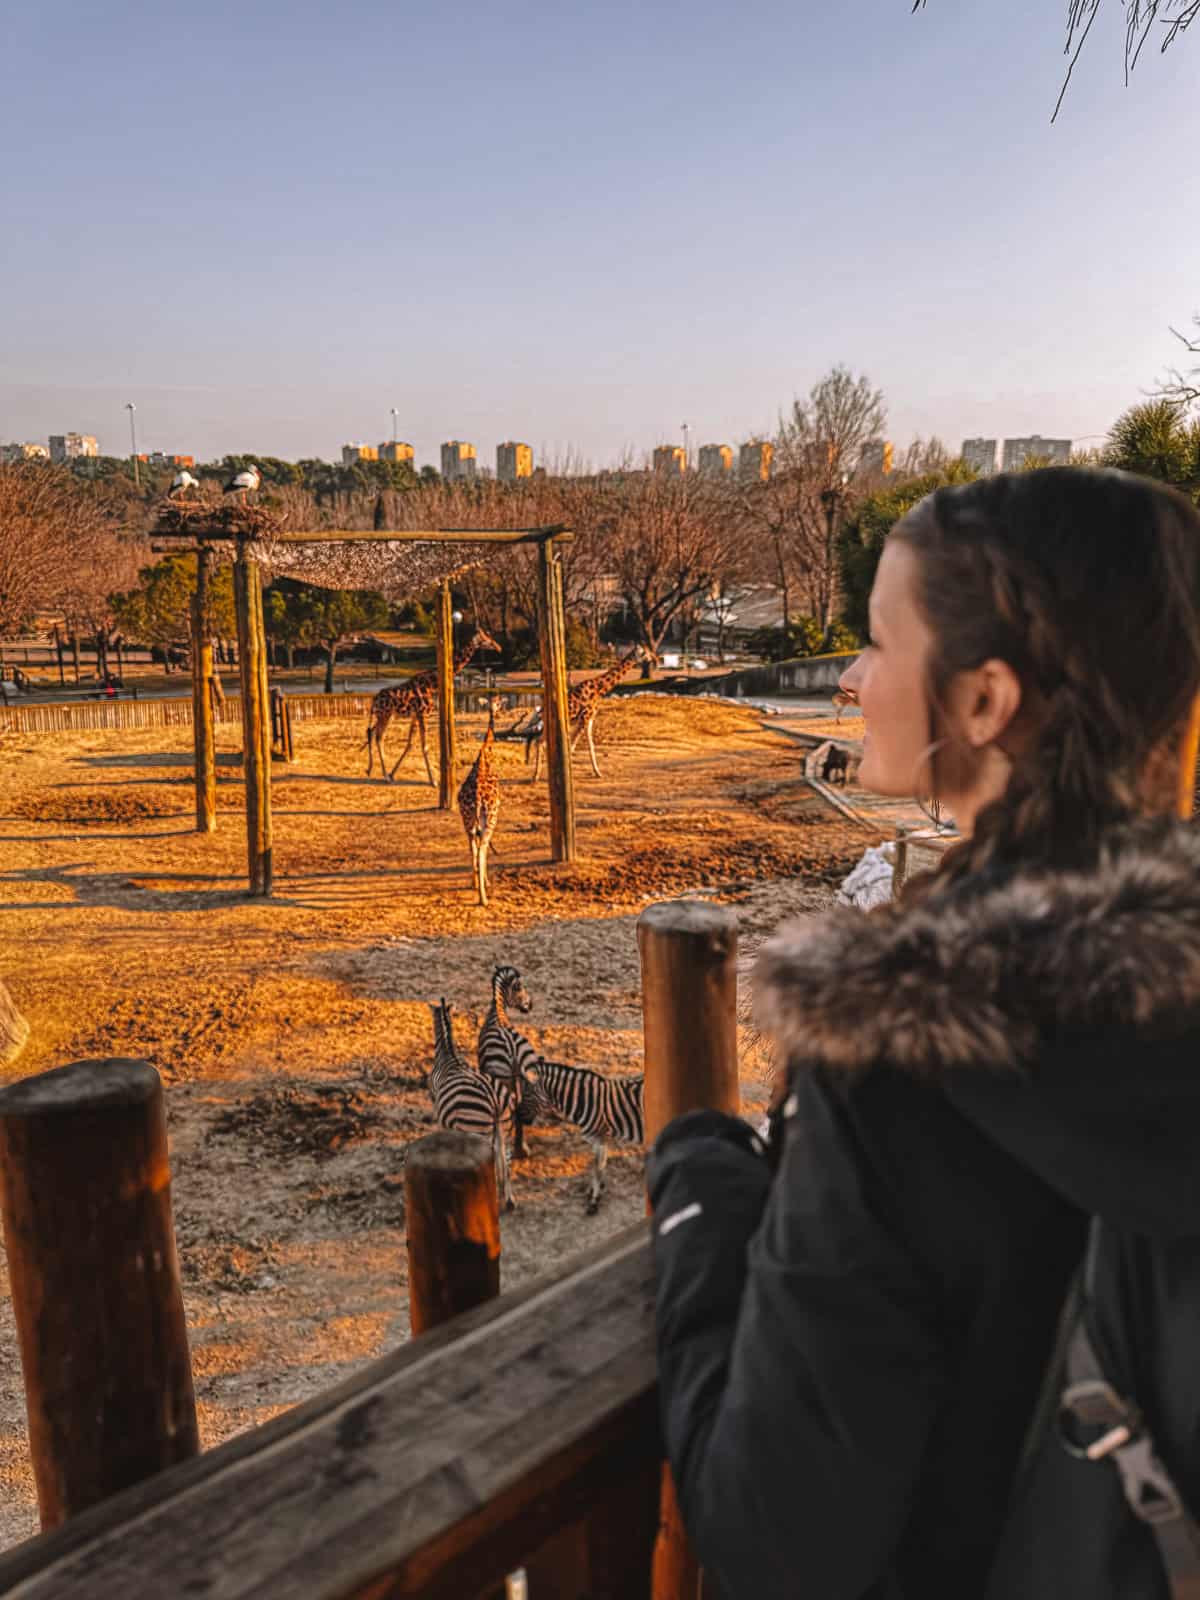 Woman observing zebras in an outdoor wildlife park enclosure, with the city skyline visible in the background during golden hour, illustrating a harmonious blend of urban and natural environments